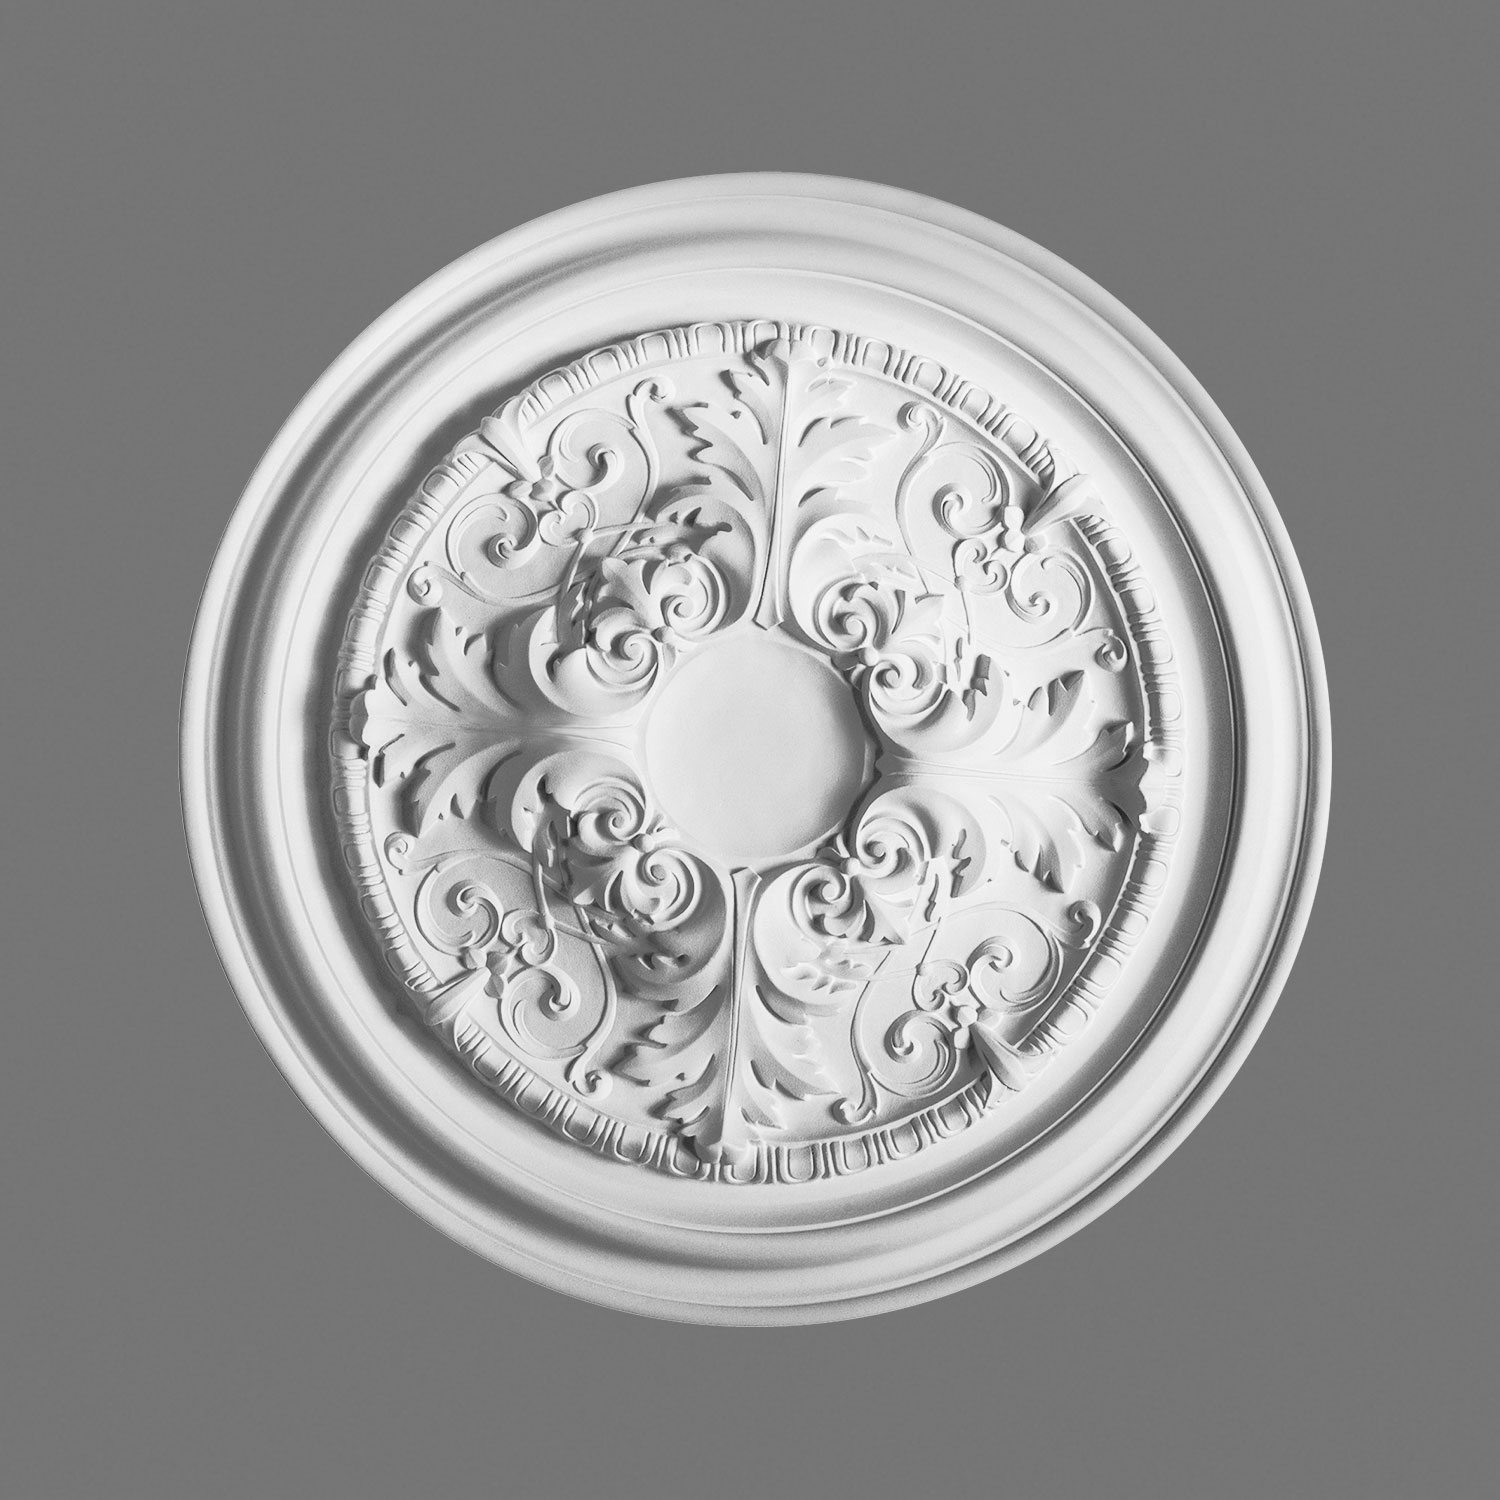 PRIMED BLANC ROND R61 ORAC Decor Canopy Dome large Plafond Medallion 15 in environ 38.10 cm